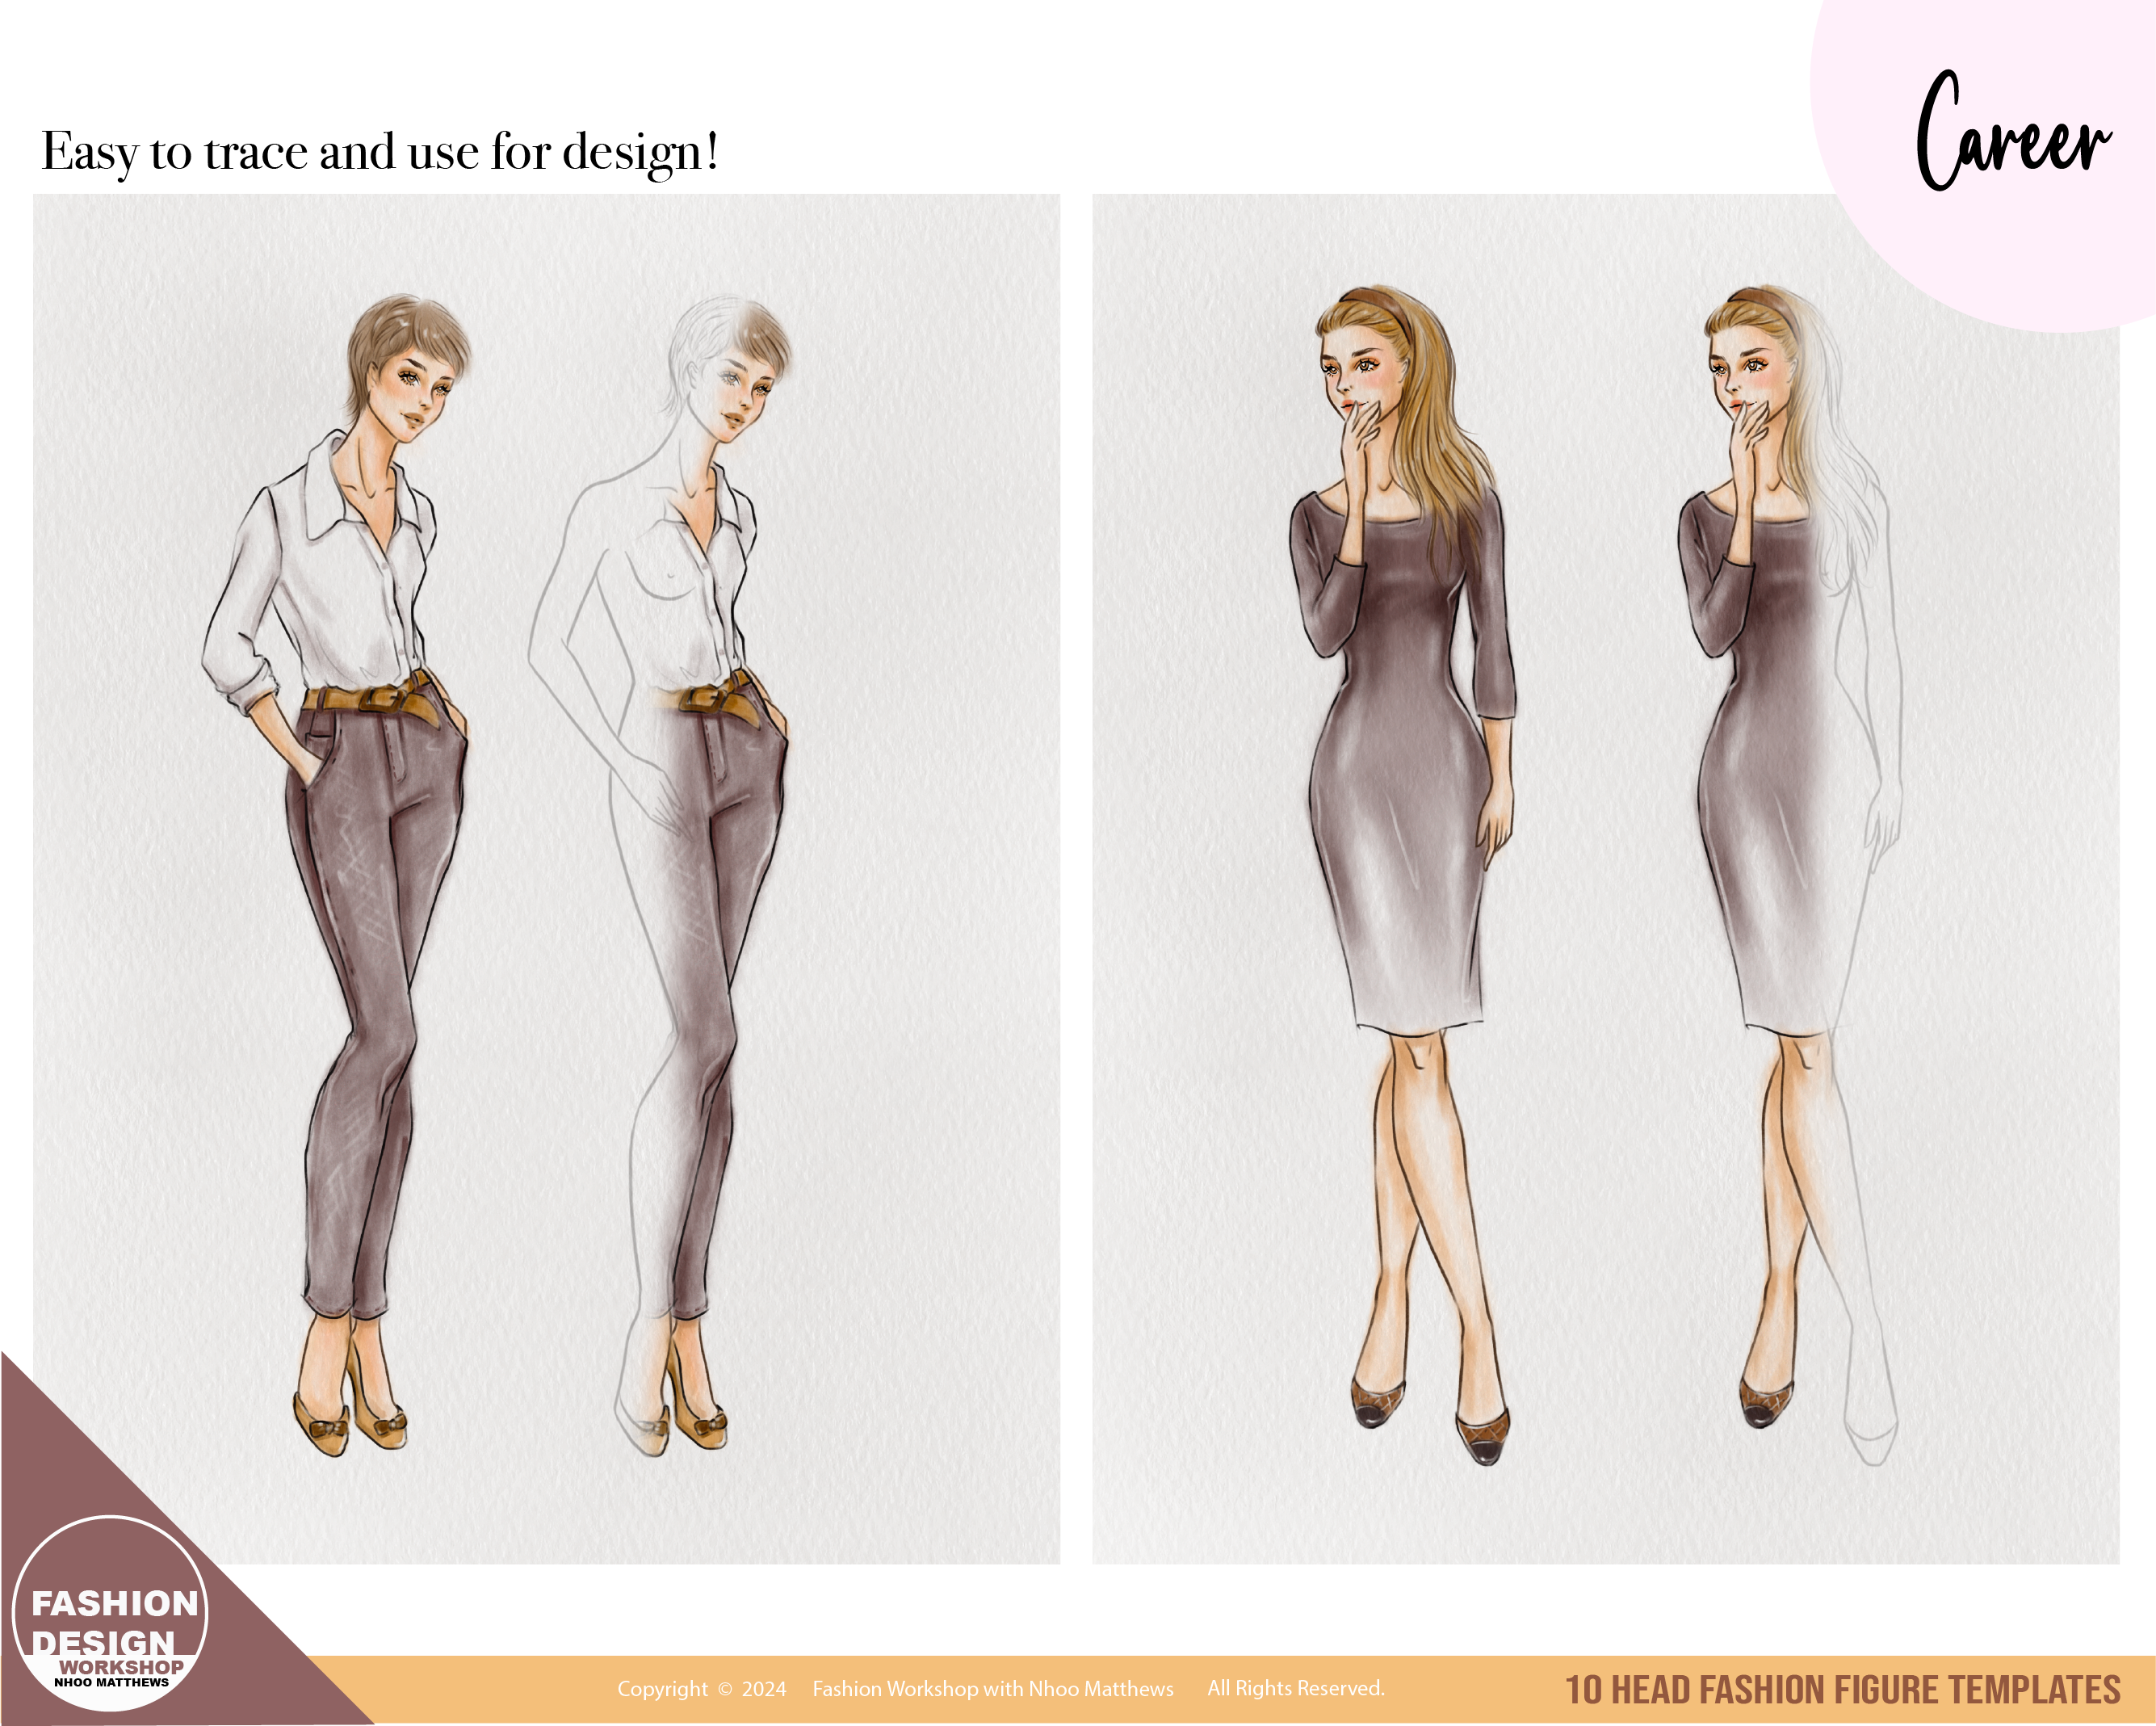 Art a Little More Robust-Fashion Design Archives - Cindy Goes Beyond